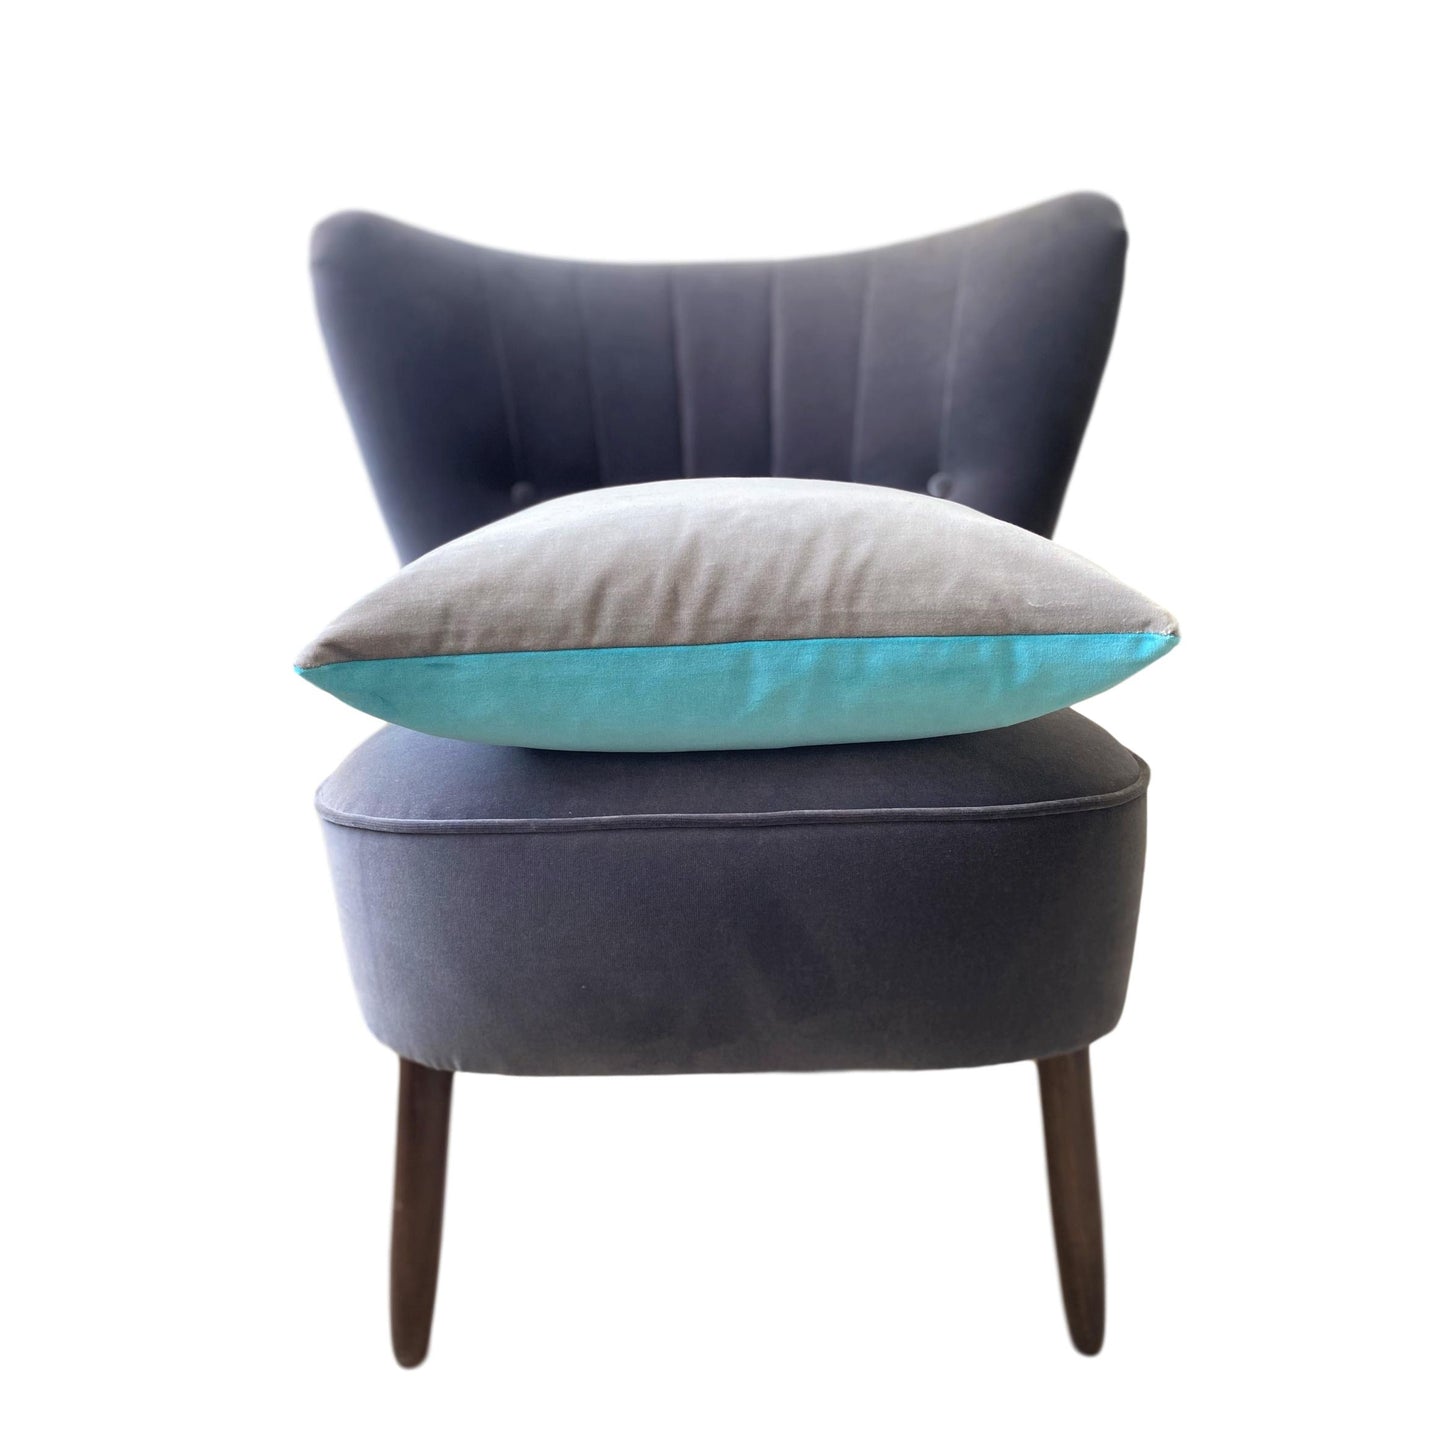 Turquoise Velvet Cushion Cover with Silver Grey